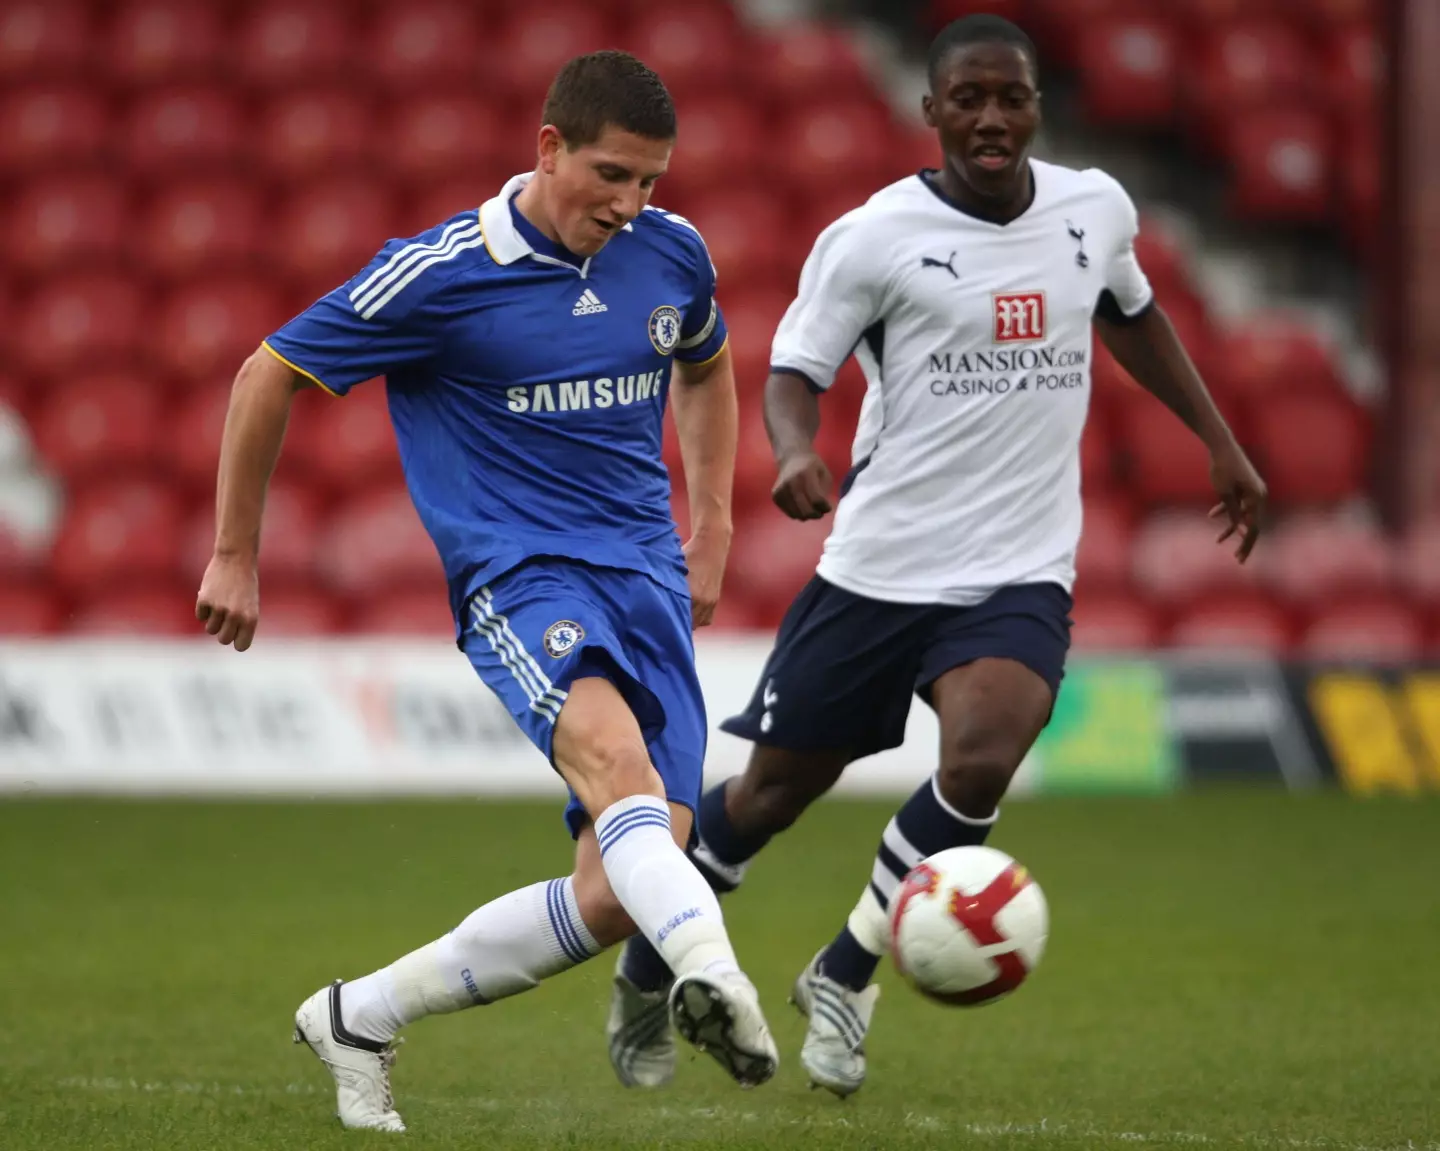 Sam Hutchinson in action for Chelsea's reserves. (Image